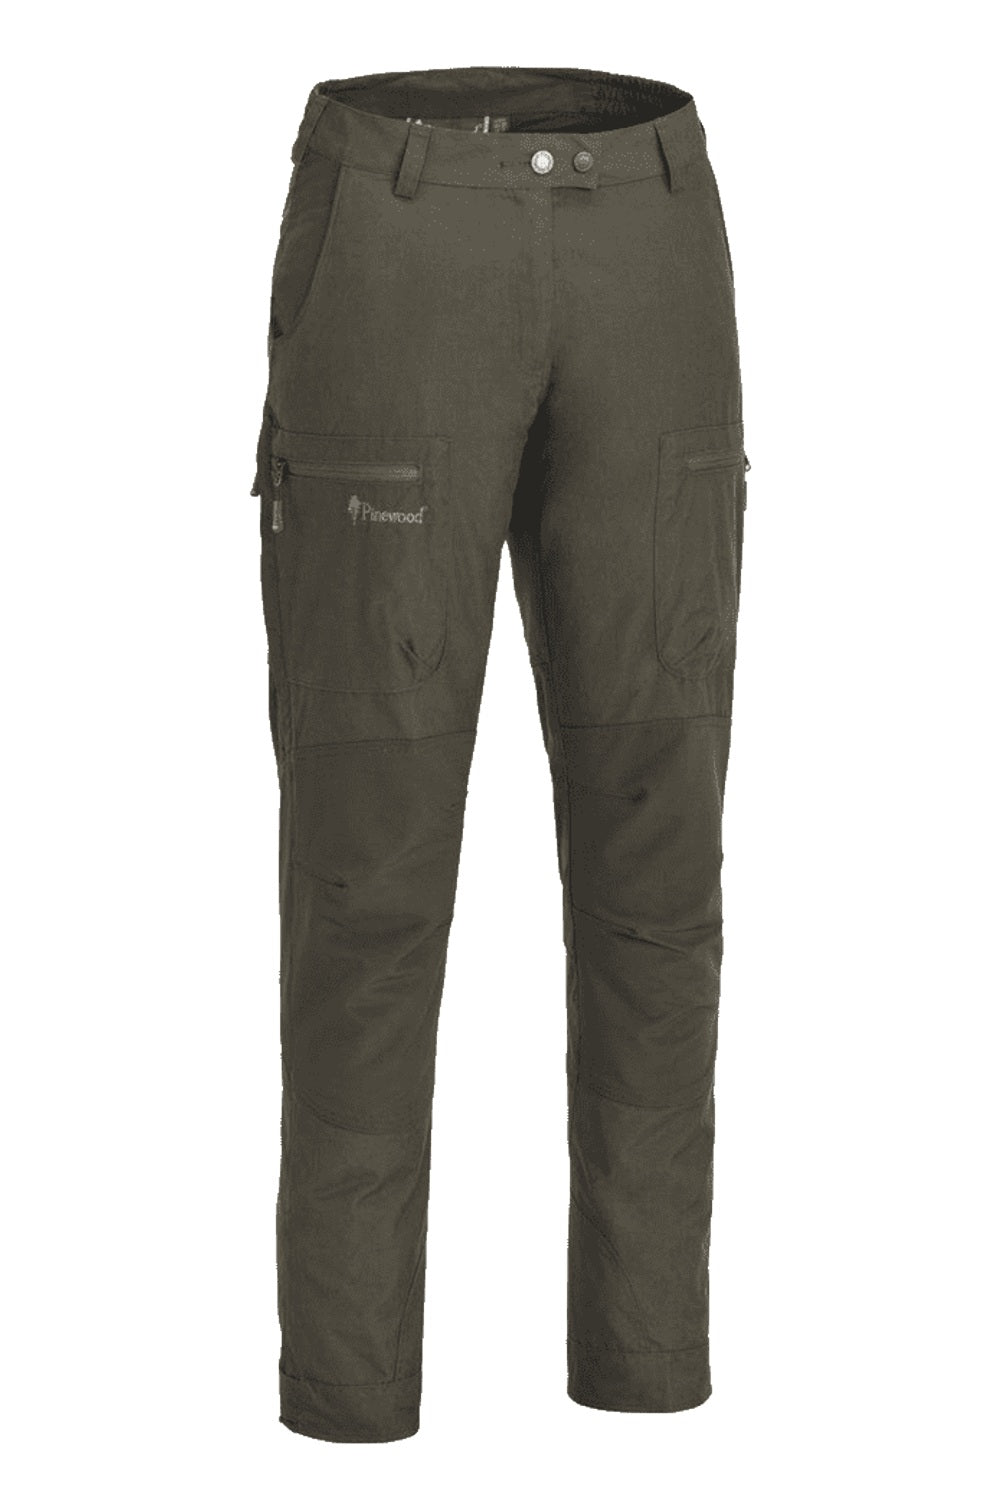 Pinewood Womens Caribou TC Trousers in Dark Olive 